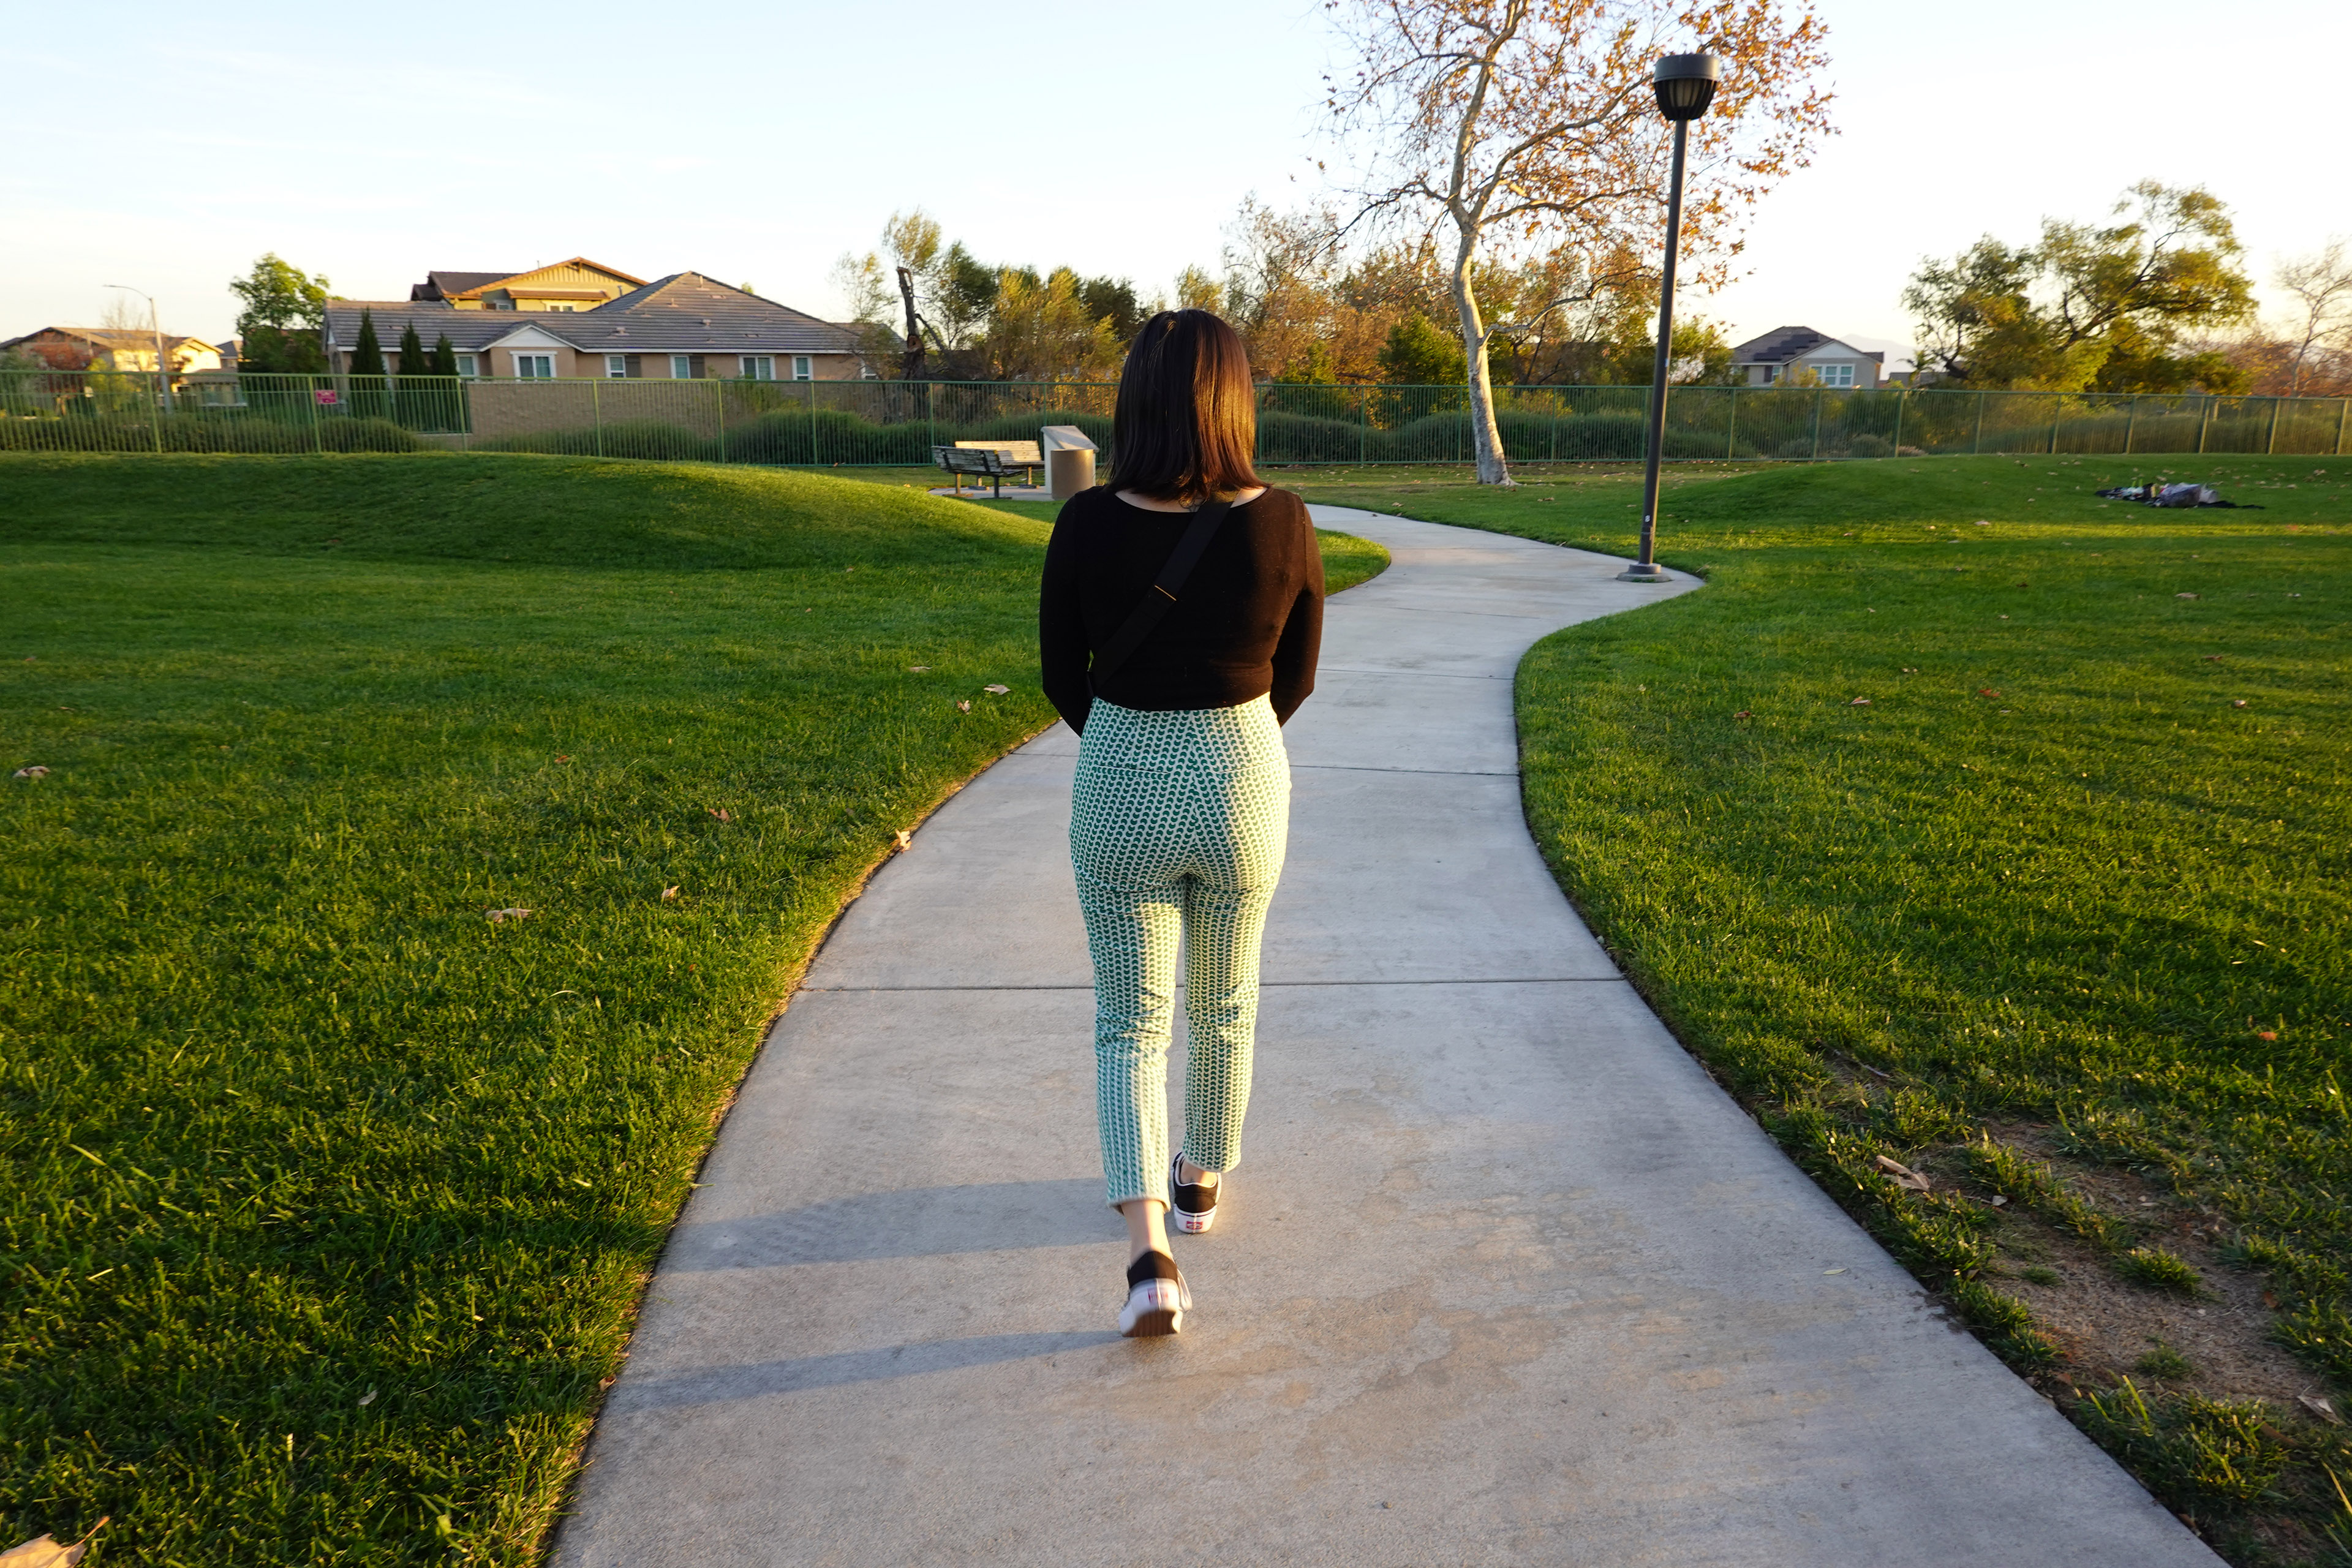 Deanna Gomez walks away from the camera on a paved walkway between two grassy areas.